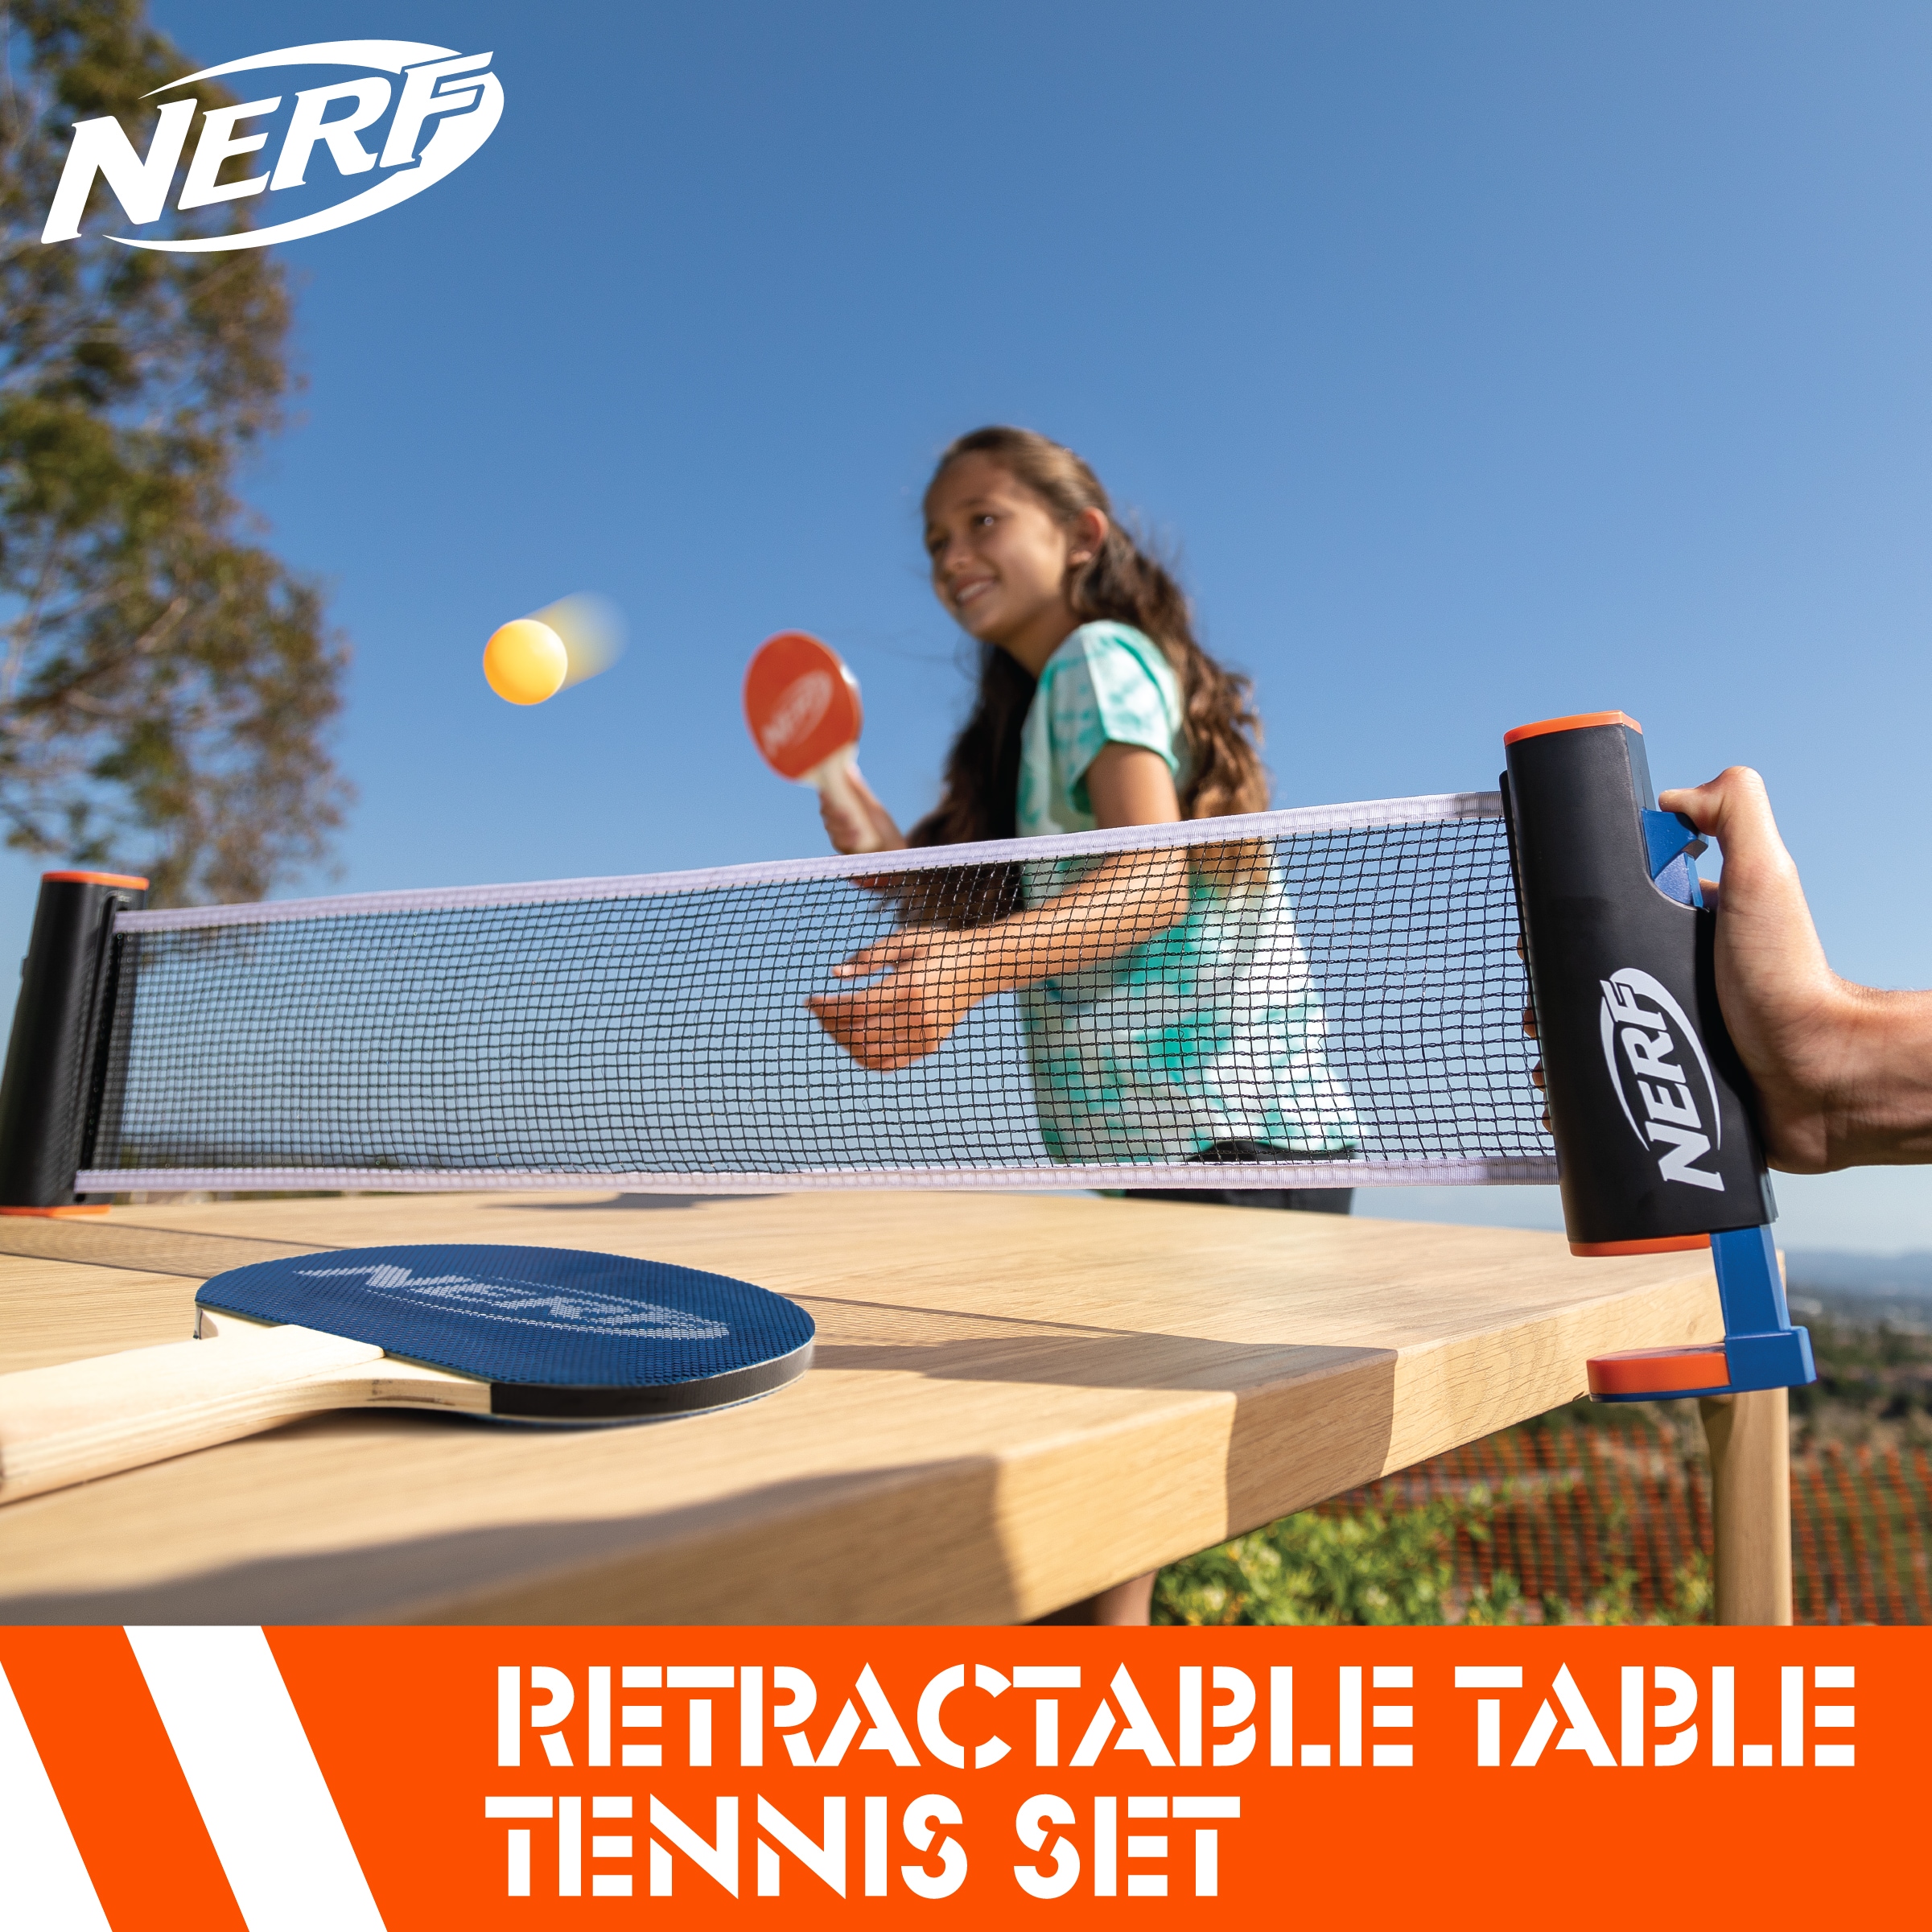 Aventurero Nos vemos mañana Desgastado Nerf Retractable Table Top Tennis Net and Posts Set in the Ping Pong  Accessories department at Lowes.com